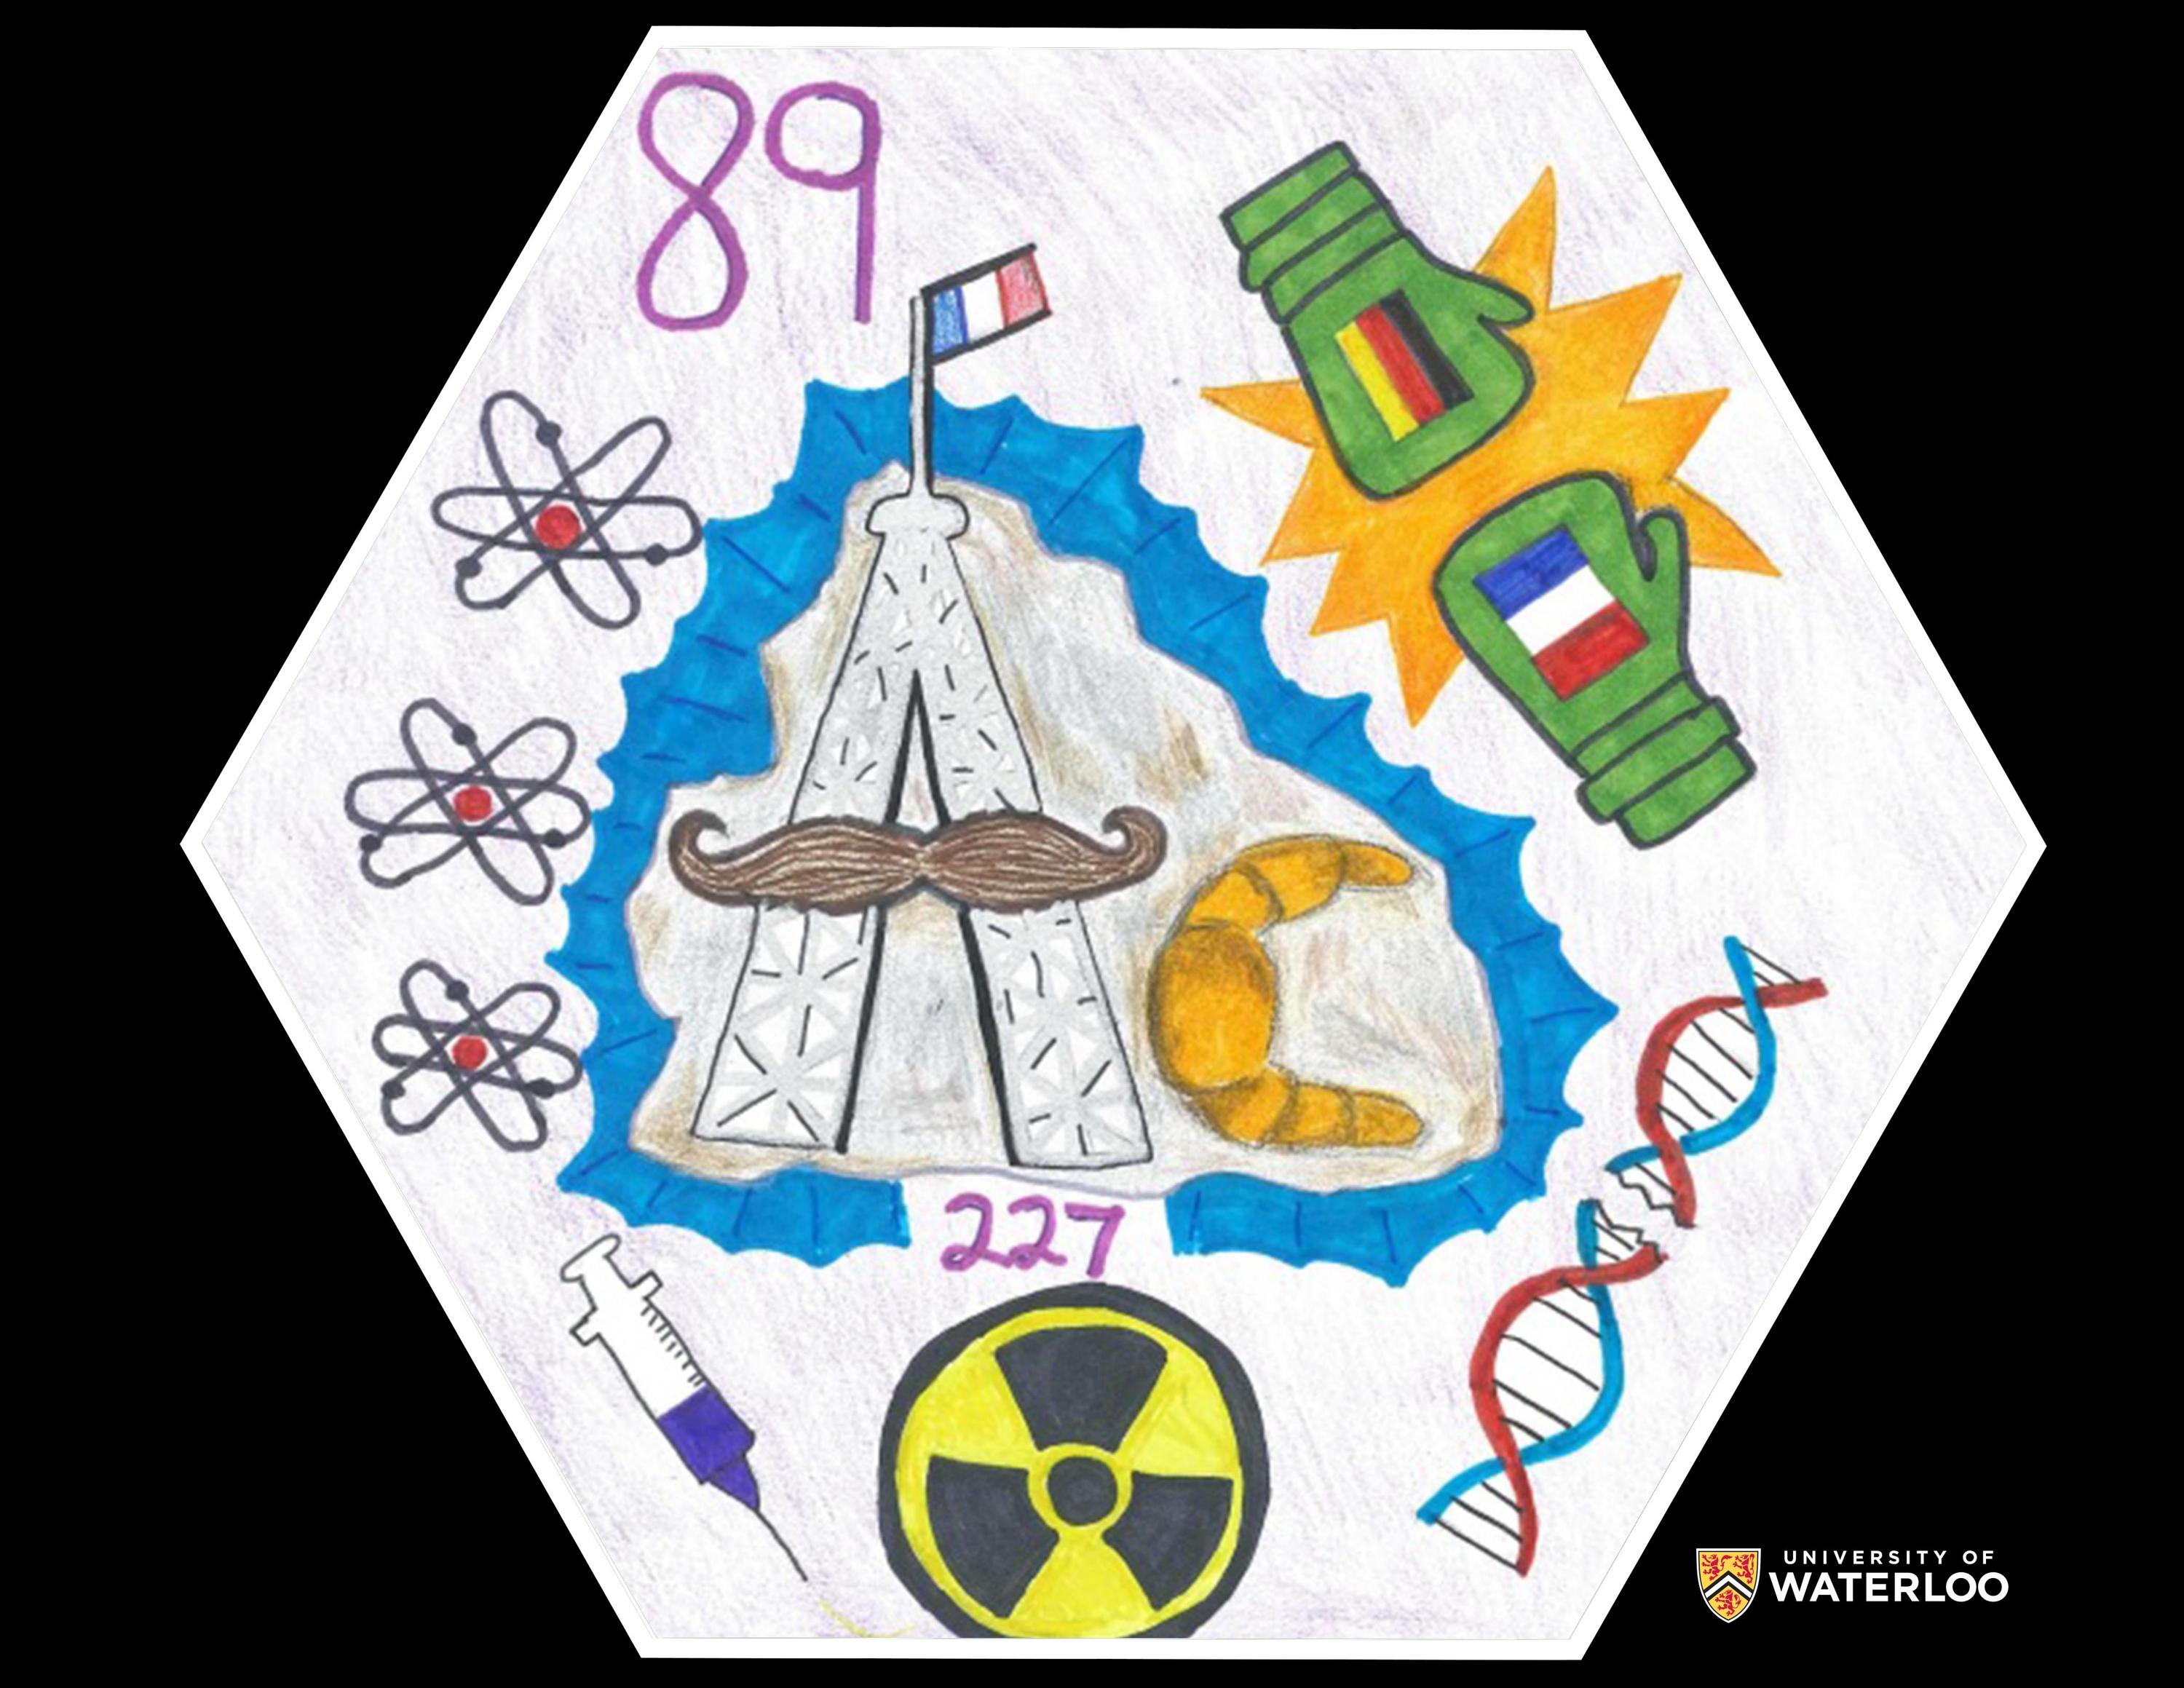 Coloured pencil on white background. The chemical symbol “Ac” written using the Eiffel tower and a croissant. Surrounding the central image are “89”, two boxing gloves punching each other with the French and German flags, a DNA strand, a radioactive symbol, a syringe, and three atomic symbols,